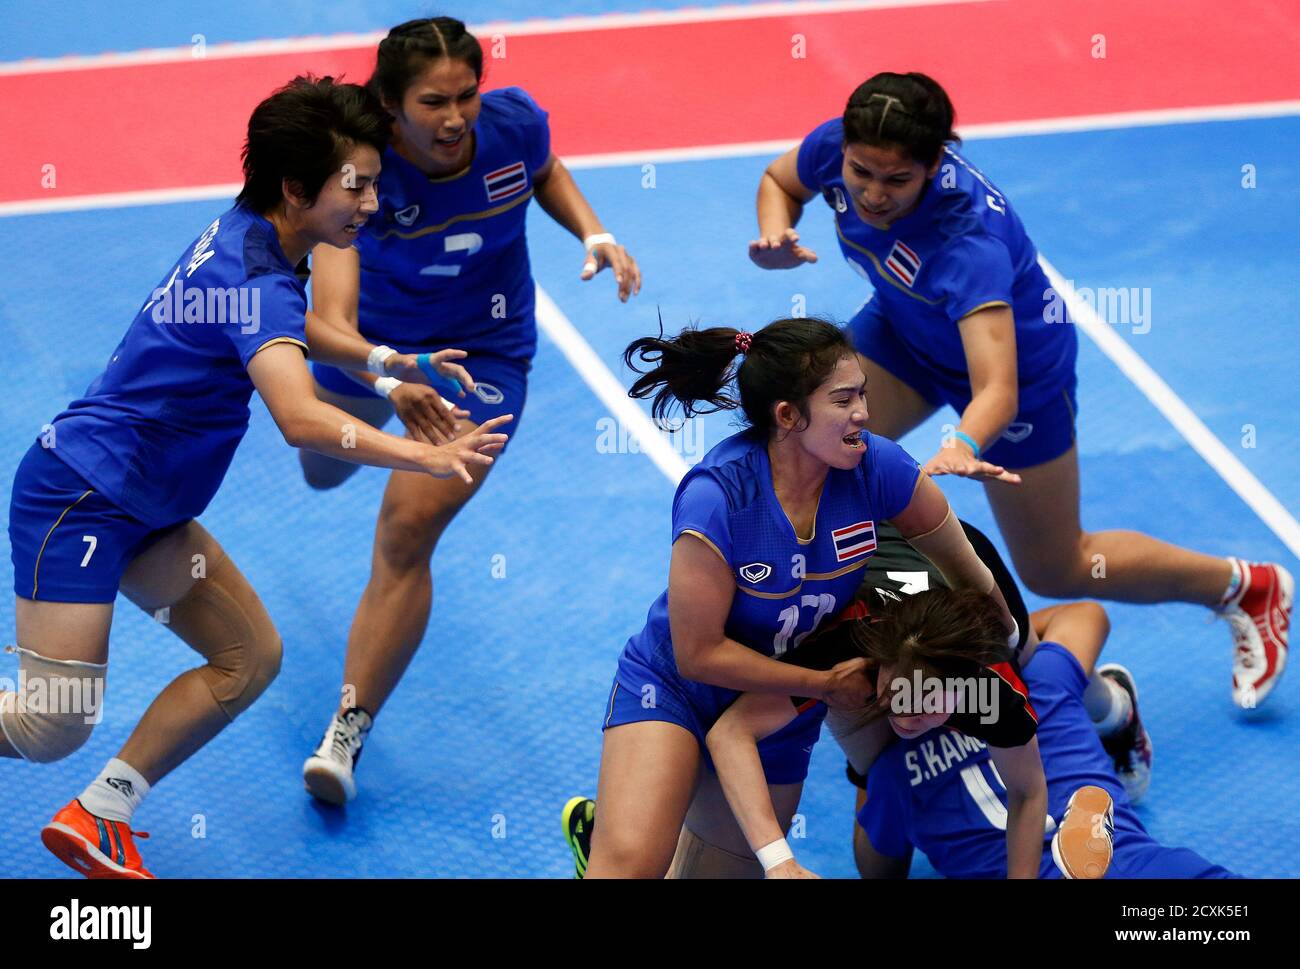 Thailand's players tackles Japan's Yumi Kaneko during their women's preliminary kabaddi match in the Songdo Global University Gymnasium at the 17th Asian Games in Incheon September 29, 2014.  REUTERS/Olivia Harris (SOUTH KOREA - Tags: SPORT) Stock Photo